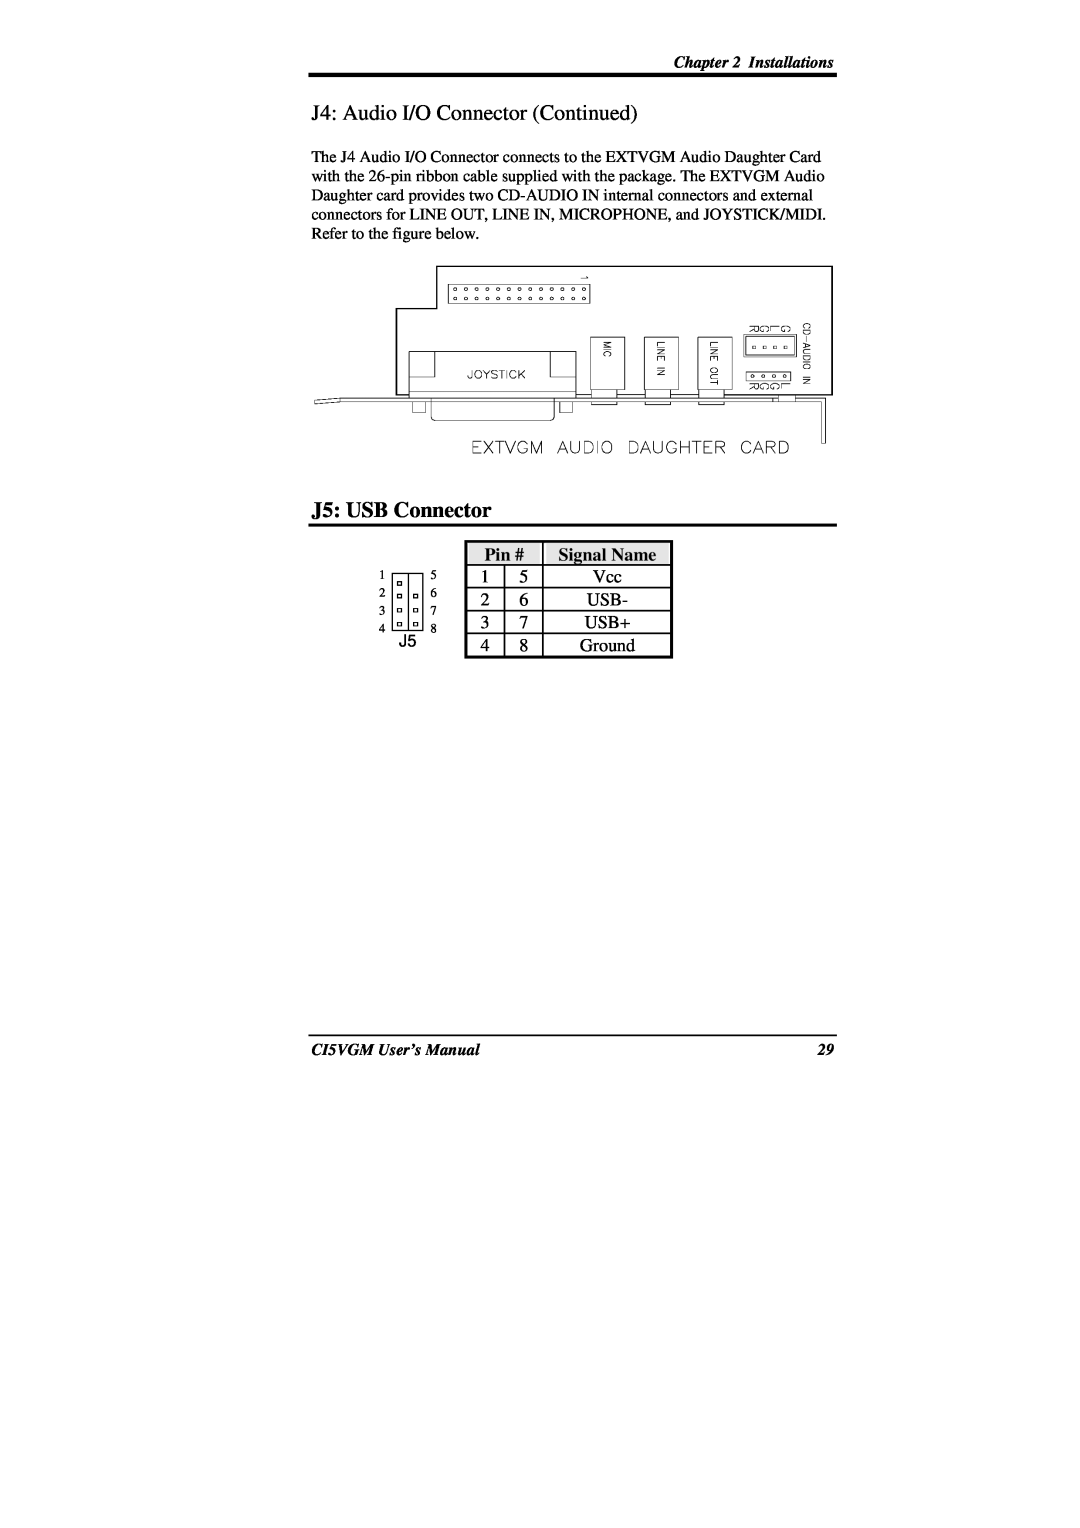 IBM CI5VGM Series user manual J4 Audio I/O Connector Continued, Pin #, Signal Name, Installations, CI5VGM User’s Manual 